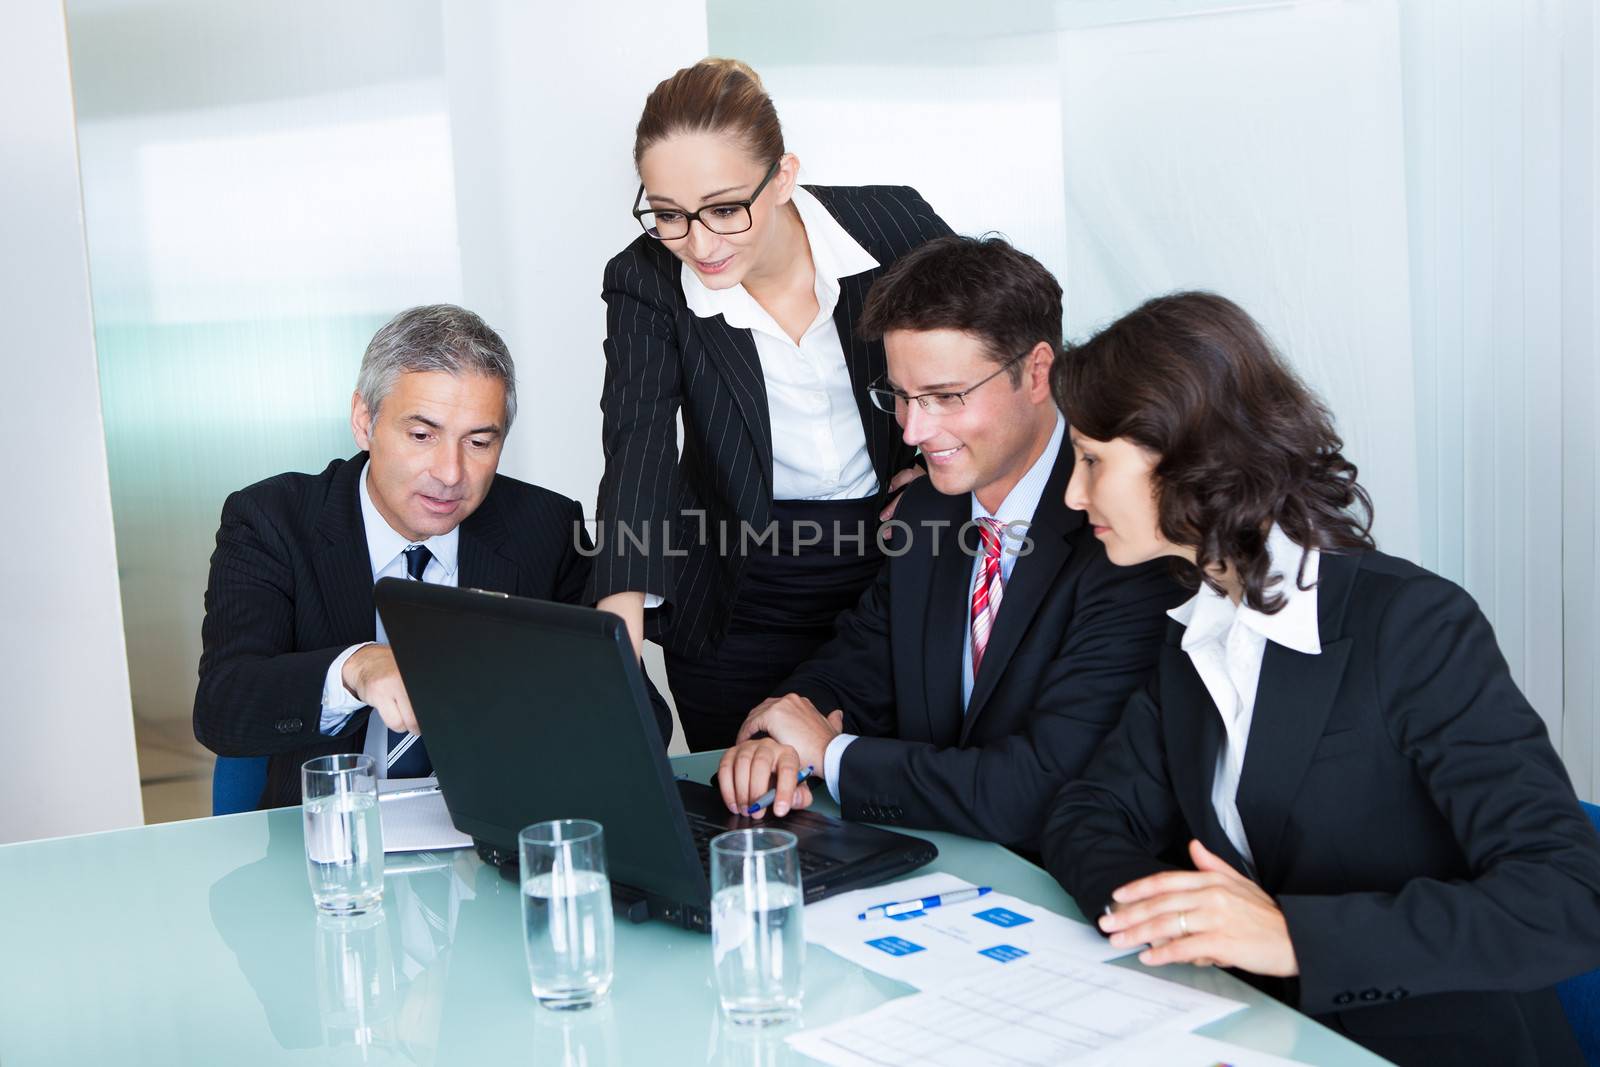 Business team of professional men and women have a meeting gathered around a laptop computer surrounded by literature